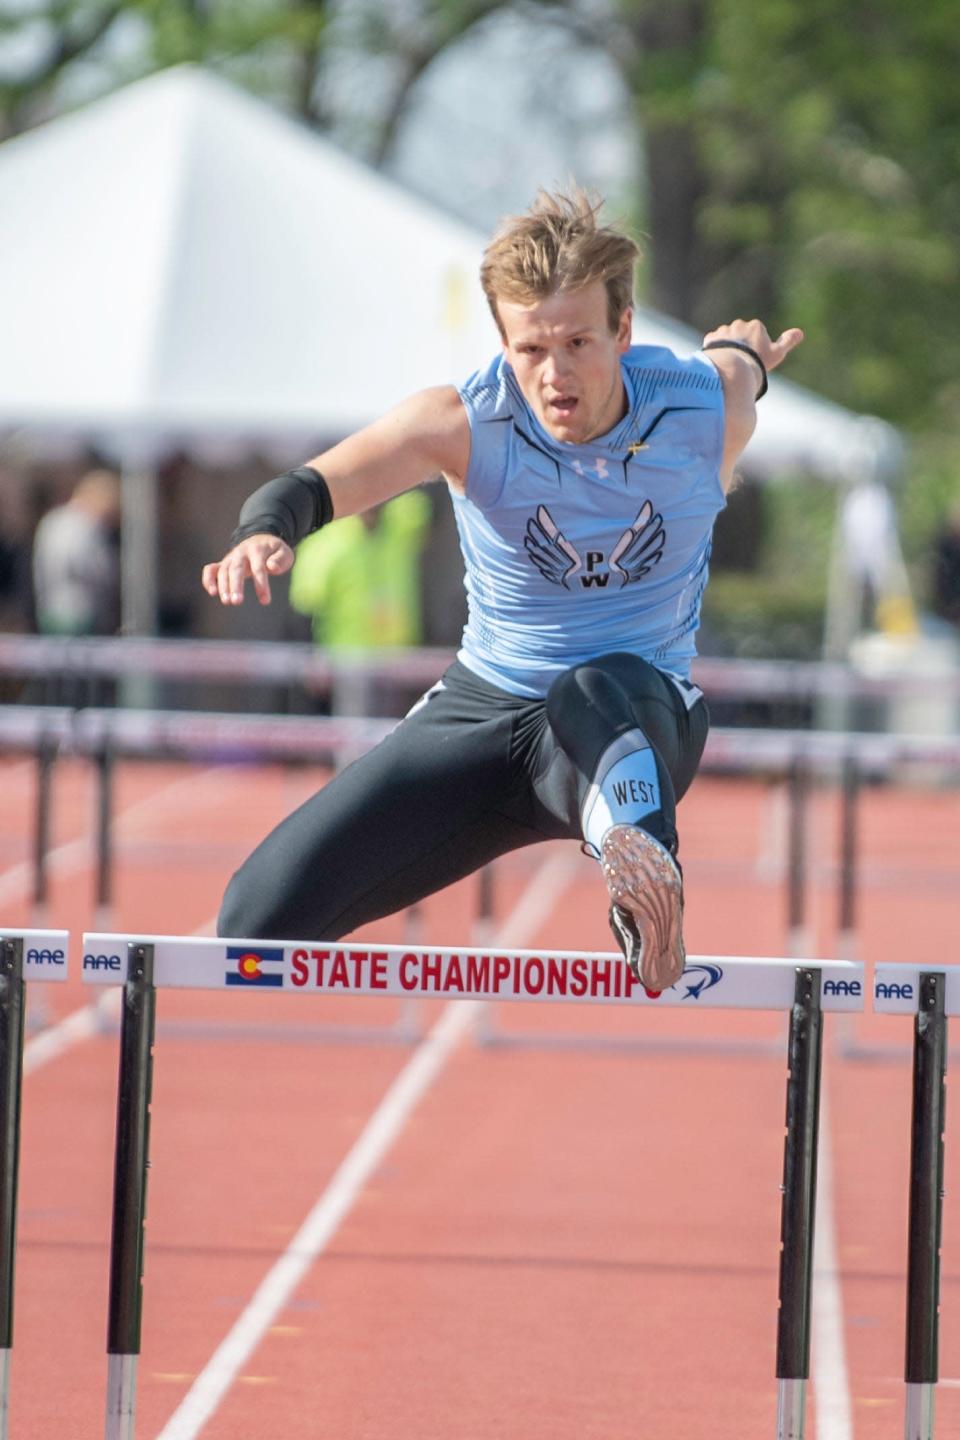 Pueblo West’s Austin Clower clears the final hurdle in the Class 4A 300 meter hurdle qualifying race during the CHSSA state track and field meet on Saturday, May 21, 2022 at Jeffco Stadium.